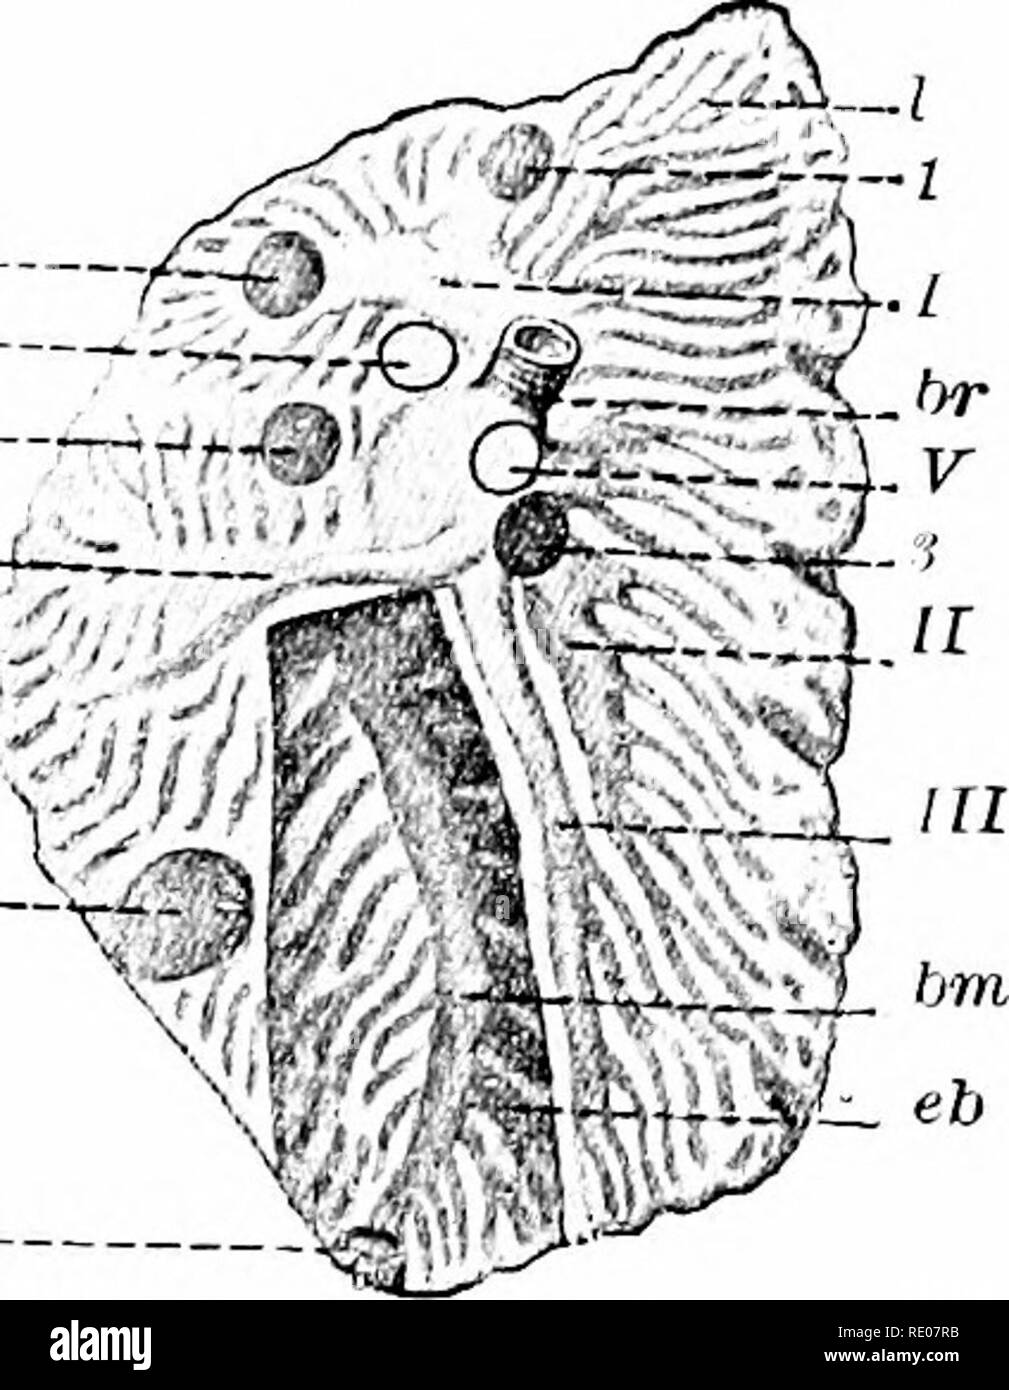 A manual of zoology. Zoology. IV. VERTEBRATA: AVES. G09 IV united to the  ribs. On entrance to tlie lung the bi'onchus (fig. 639, br) loses its  Ciirtilage supports and enlarges into